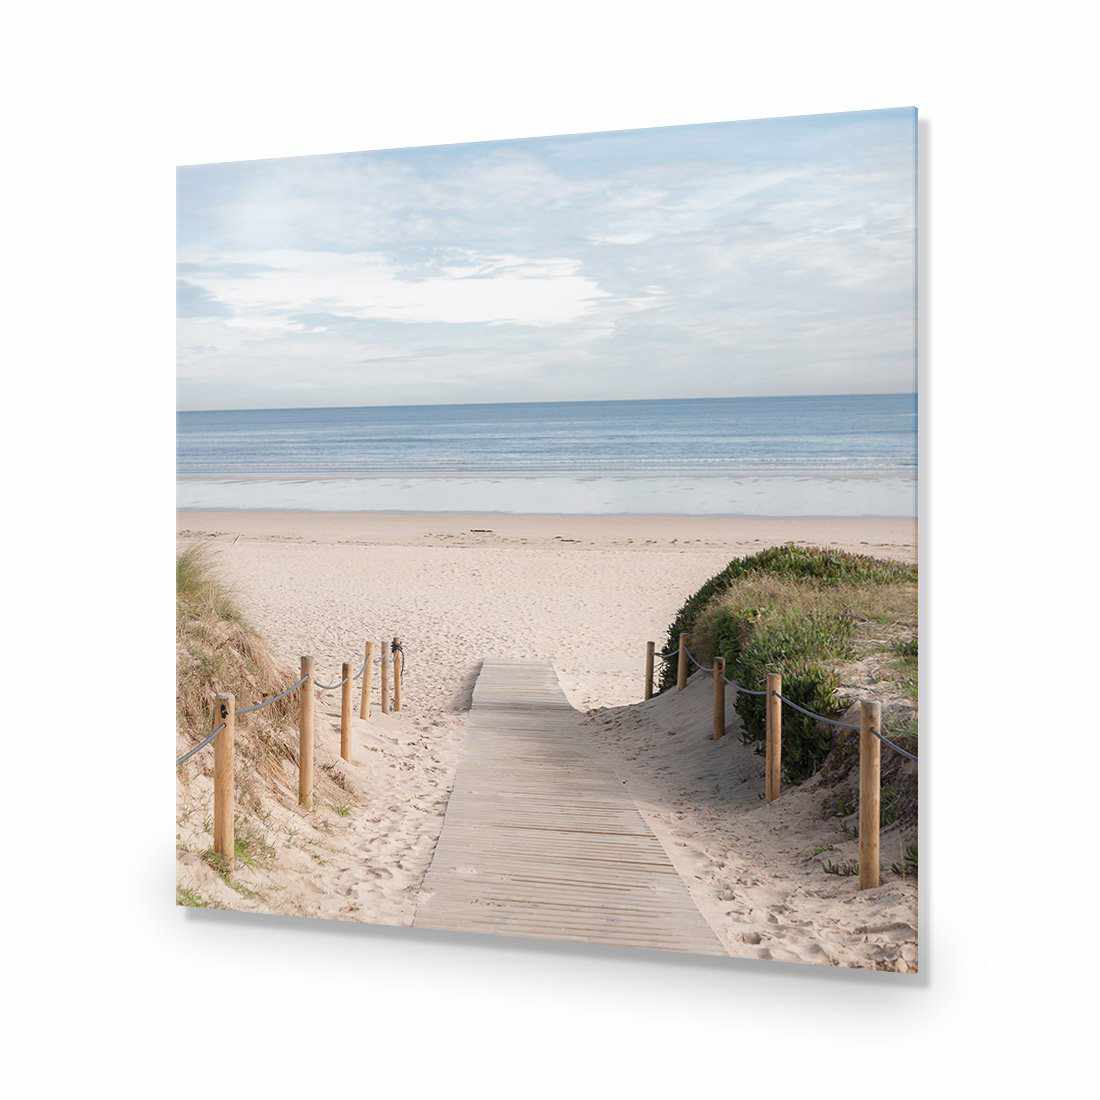 Pathway To The Sea, Square-Acrylic-Wall Art Design-Without Border-Acrylic - No Frame-37x37cm-Wall Art Designs